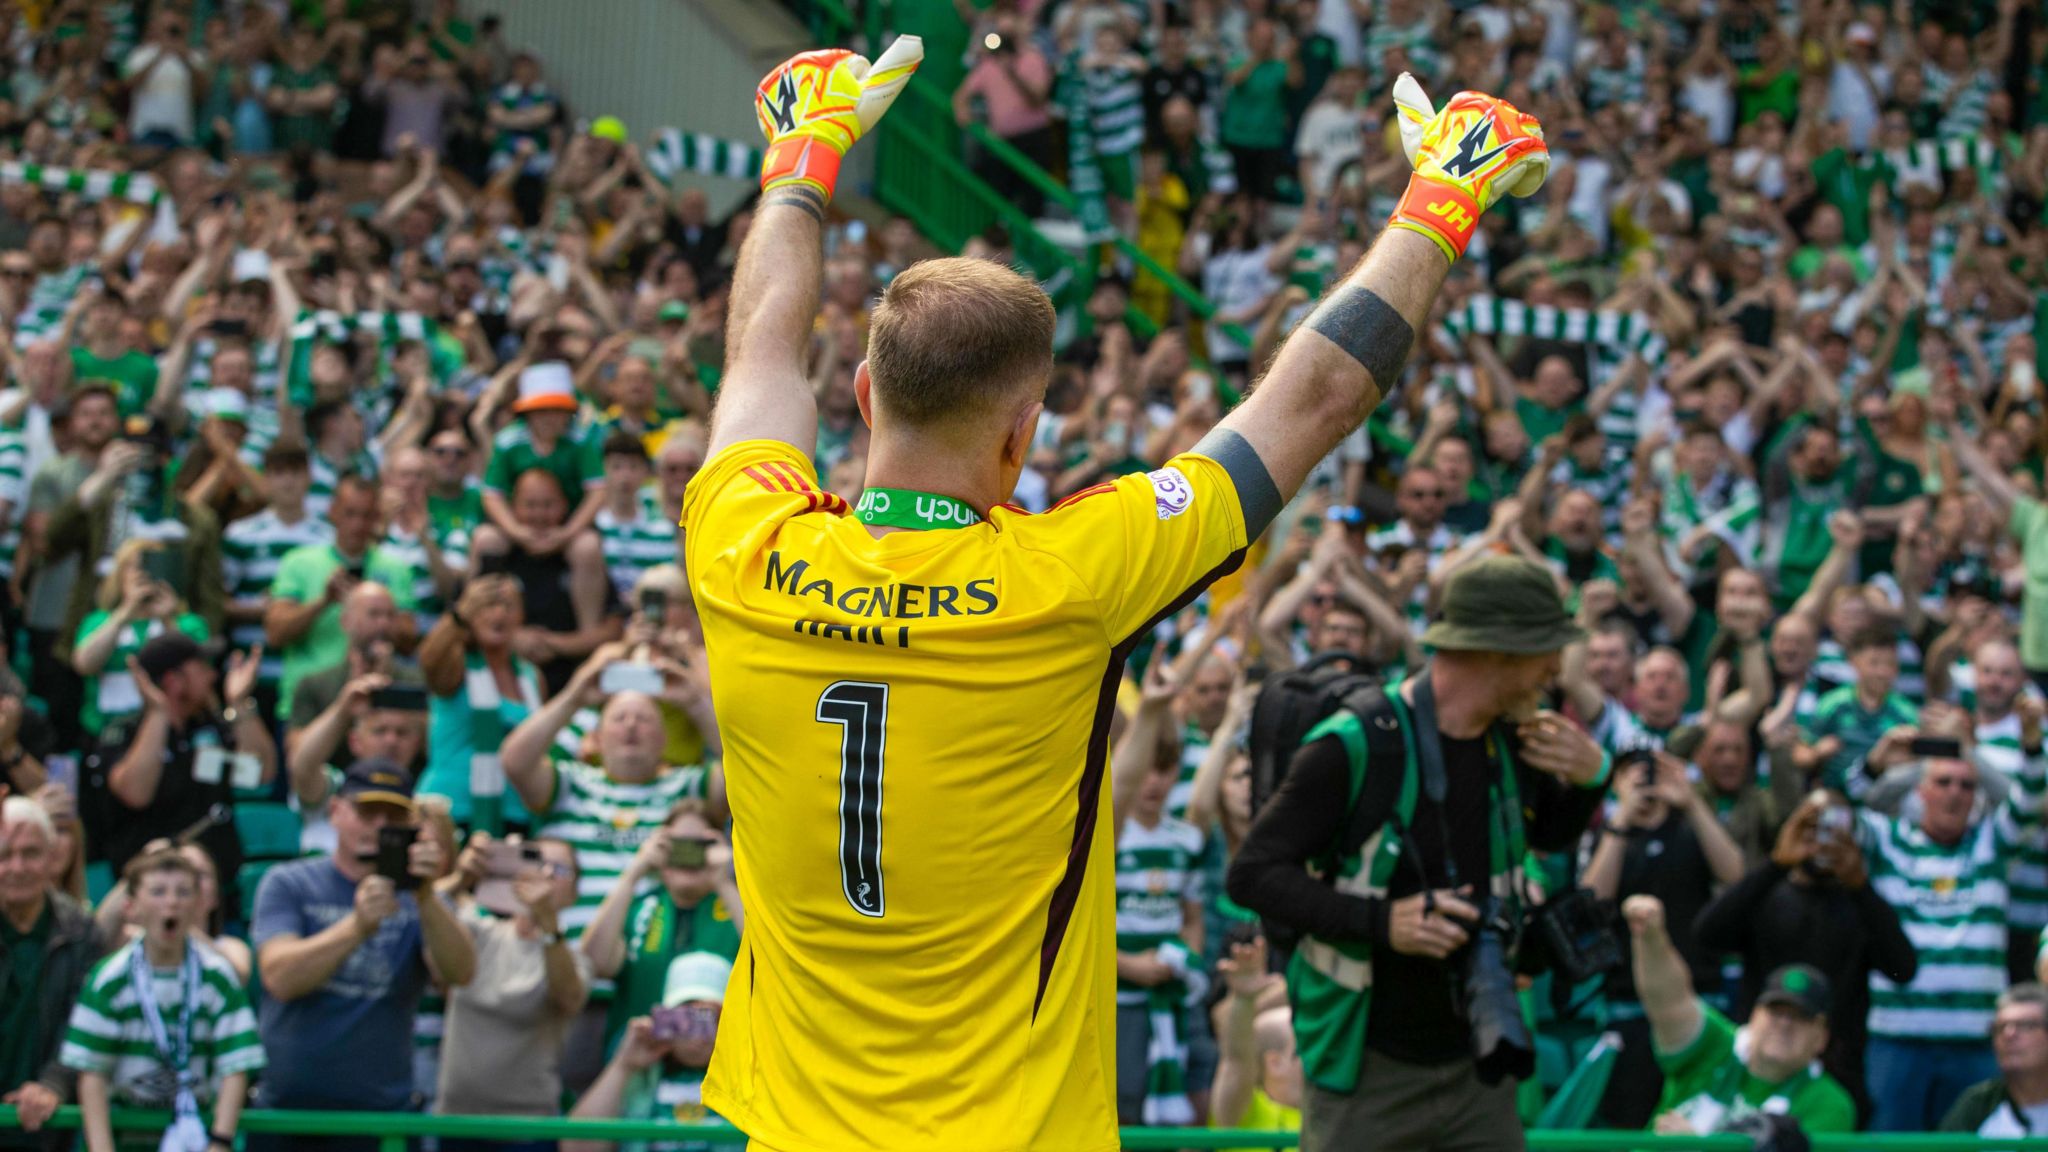 Celtic's Joe Hart at full time during a cinch Premiership match between Celtic and St Mirren at Celtic Park